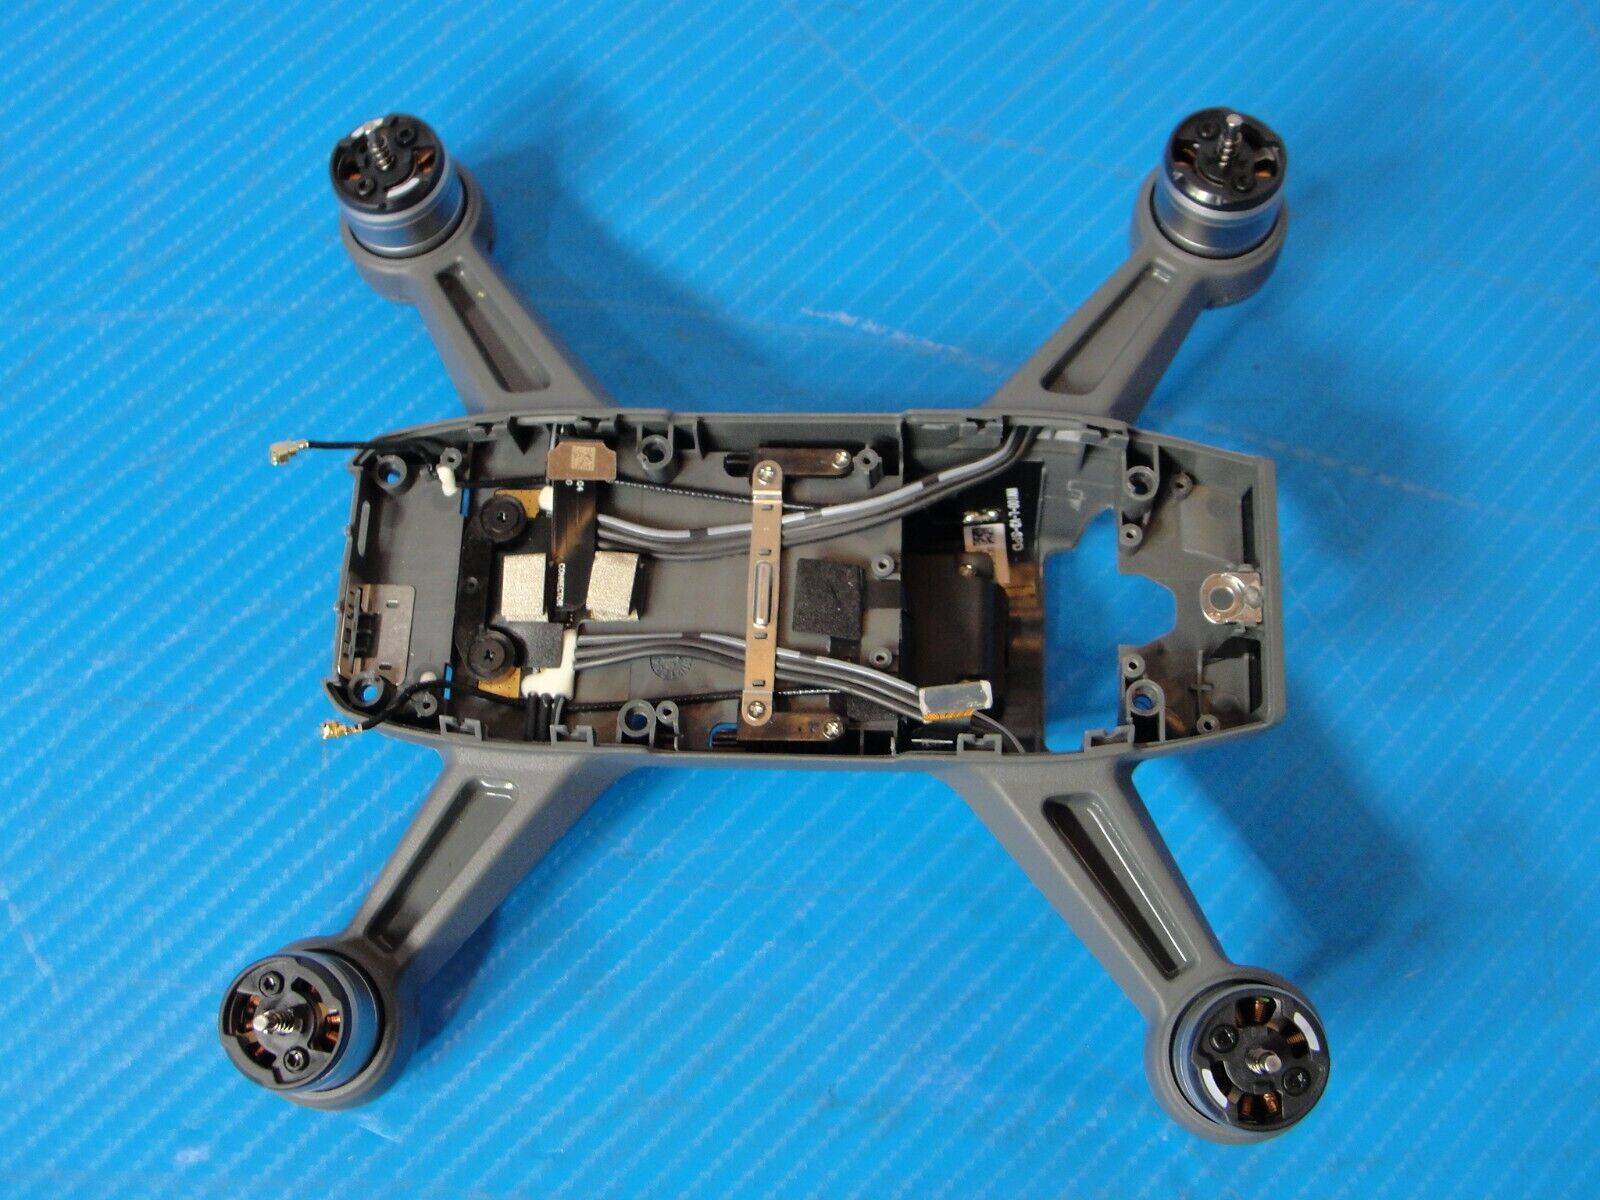 DJI Spark MM1A Drone Genuine Frame Body Shell with ESC Board and 4 Motors Good